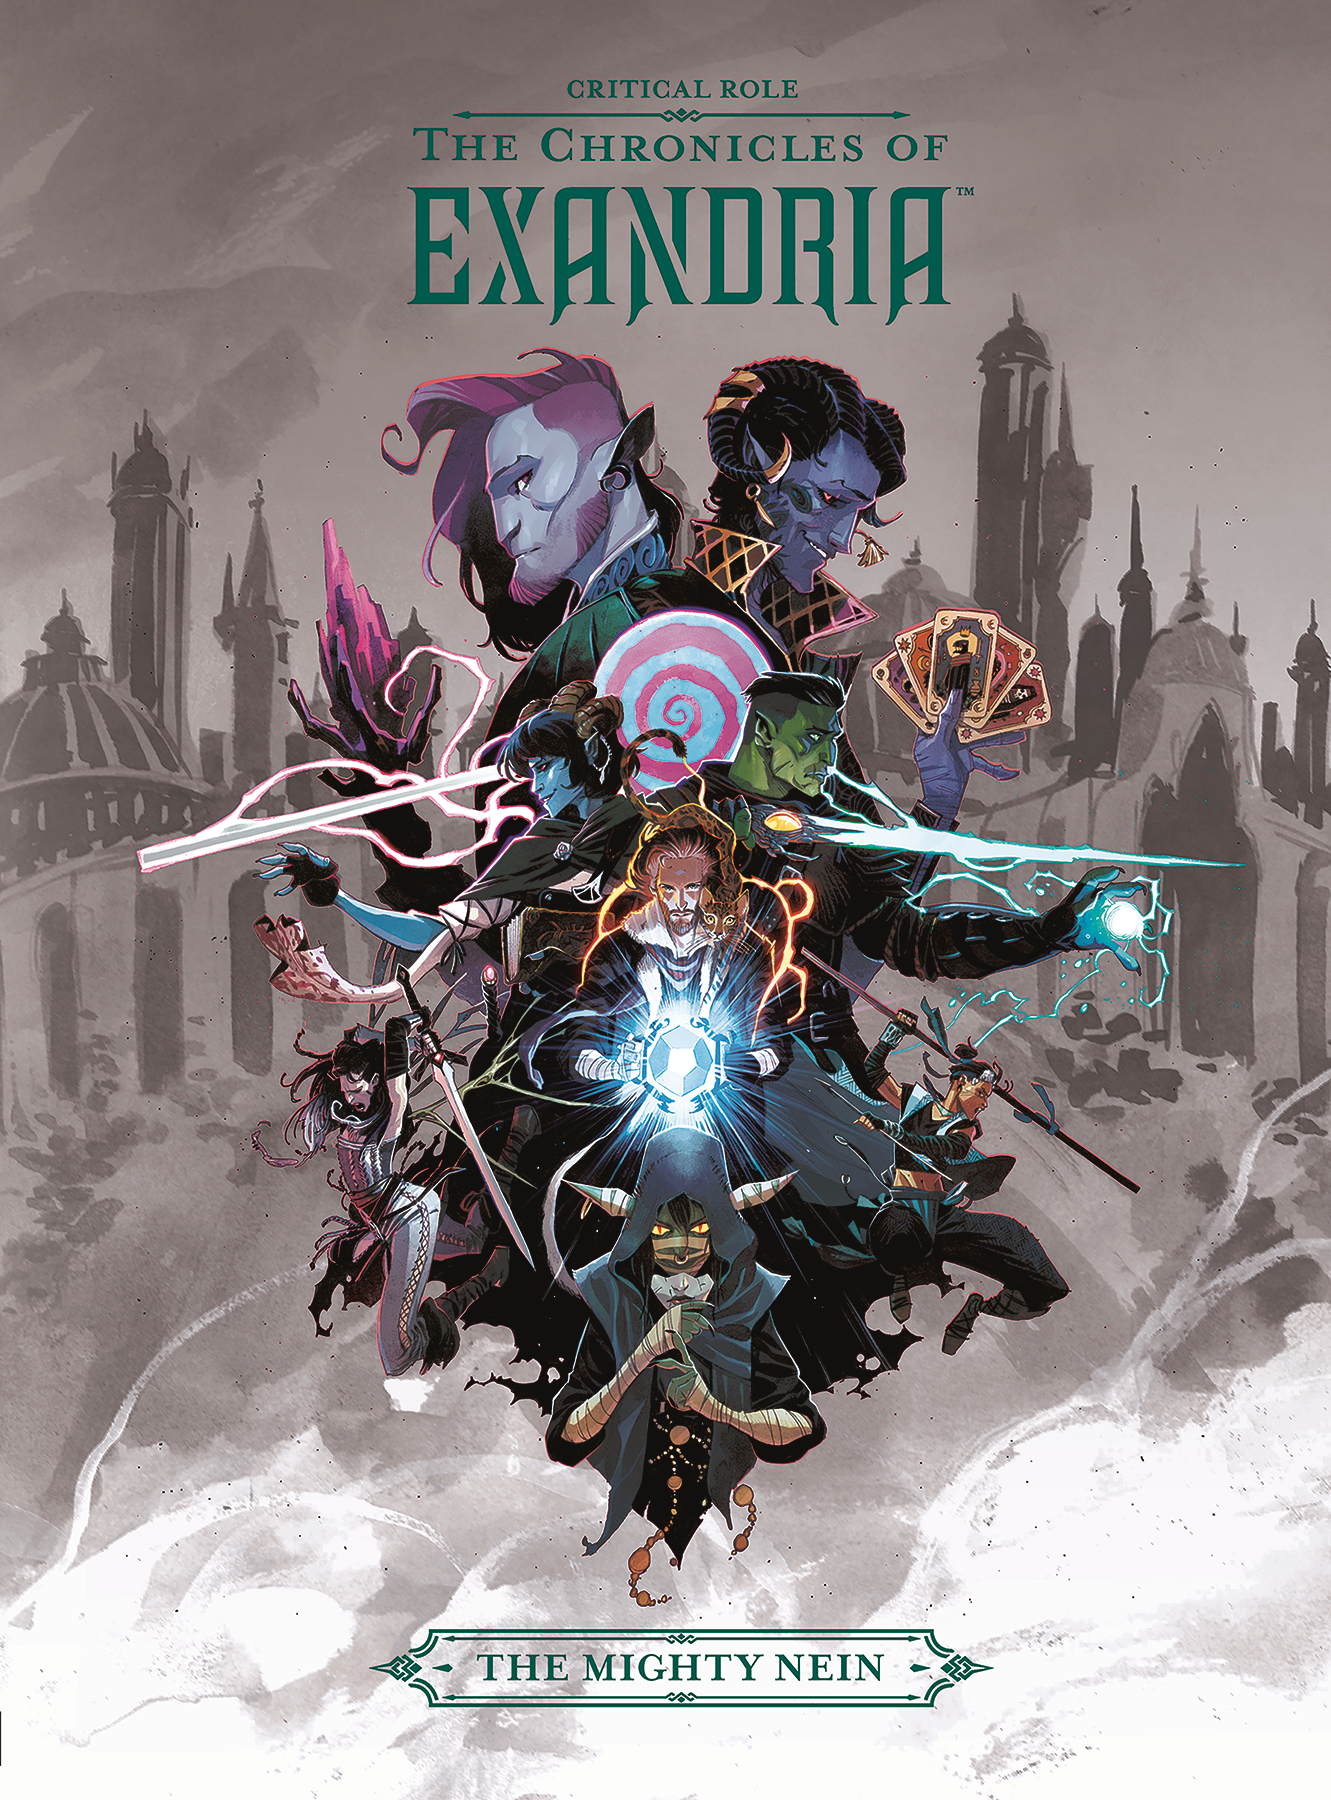 Critical Role Chronicles of Exandria Hardcover Volume 1 Mighty Nein